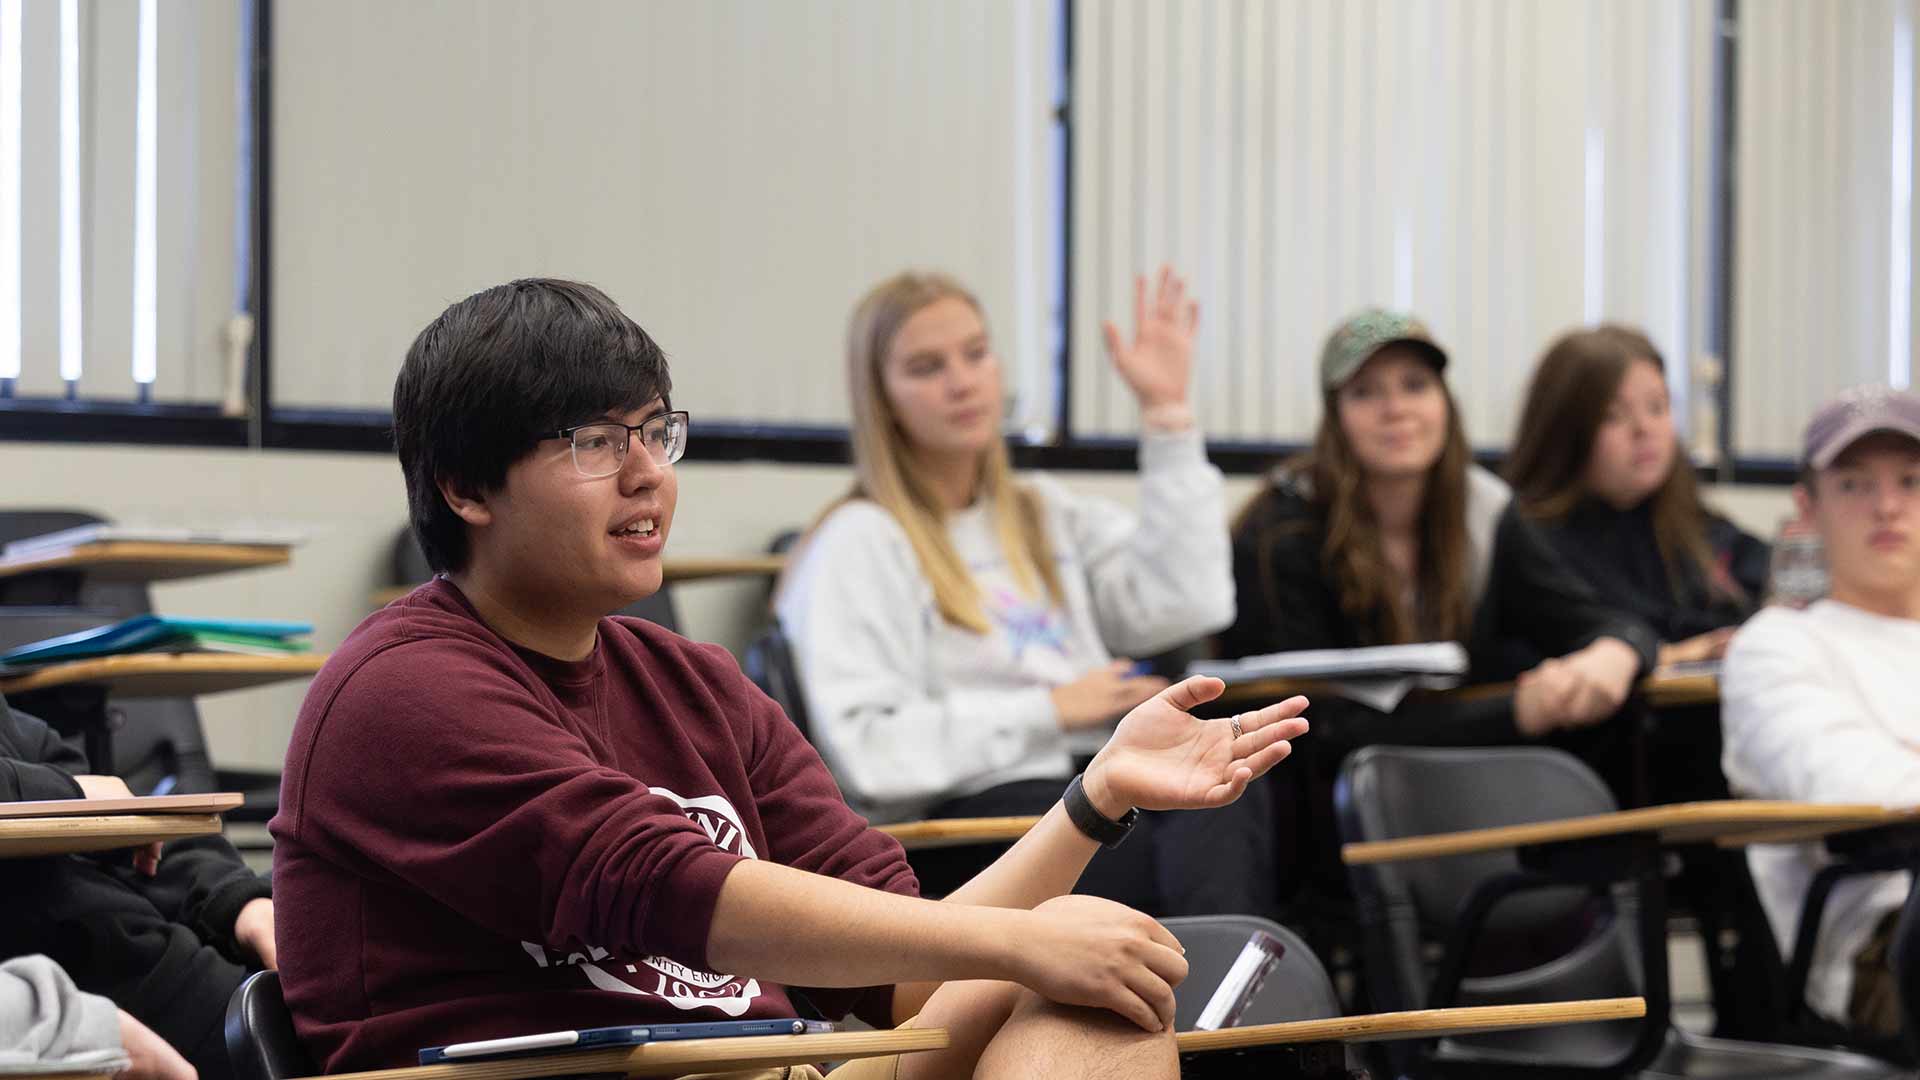 A communication student participates in a class discussion while another student raises her hand in the background.